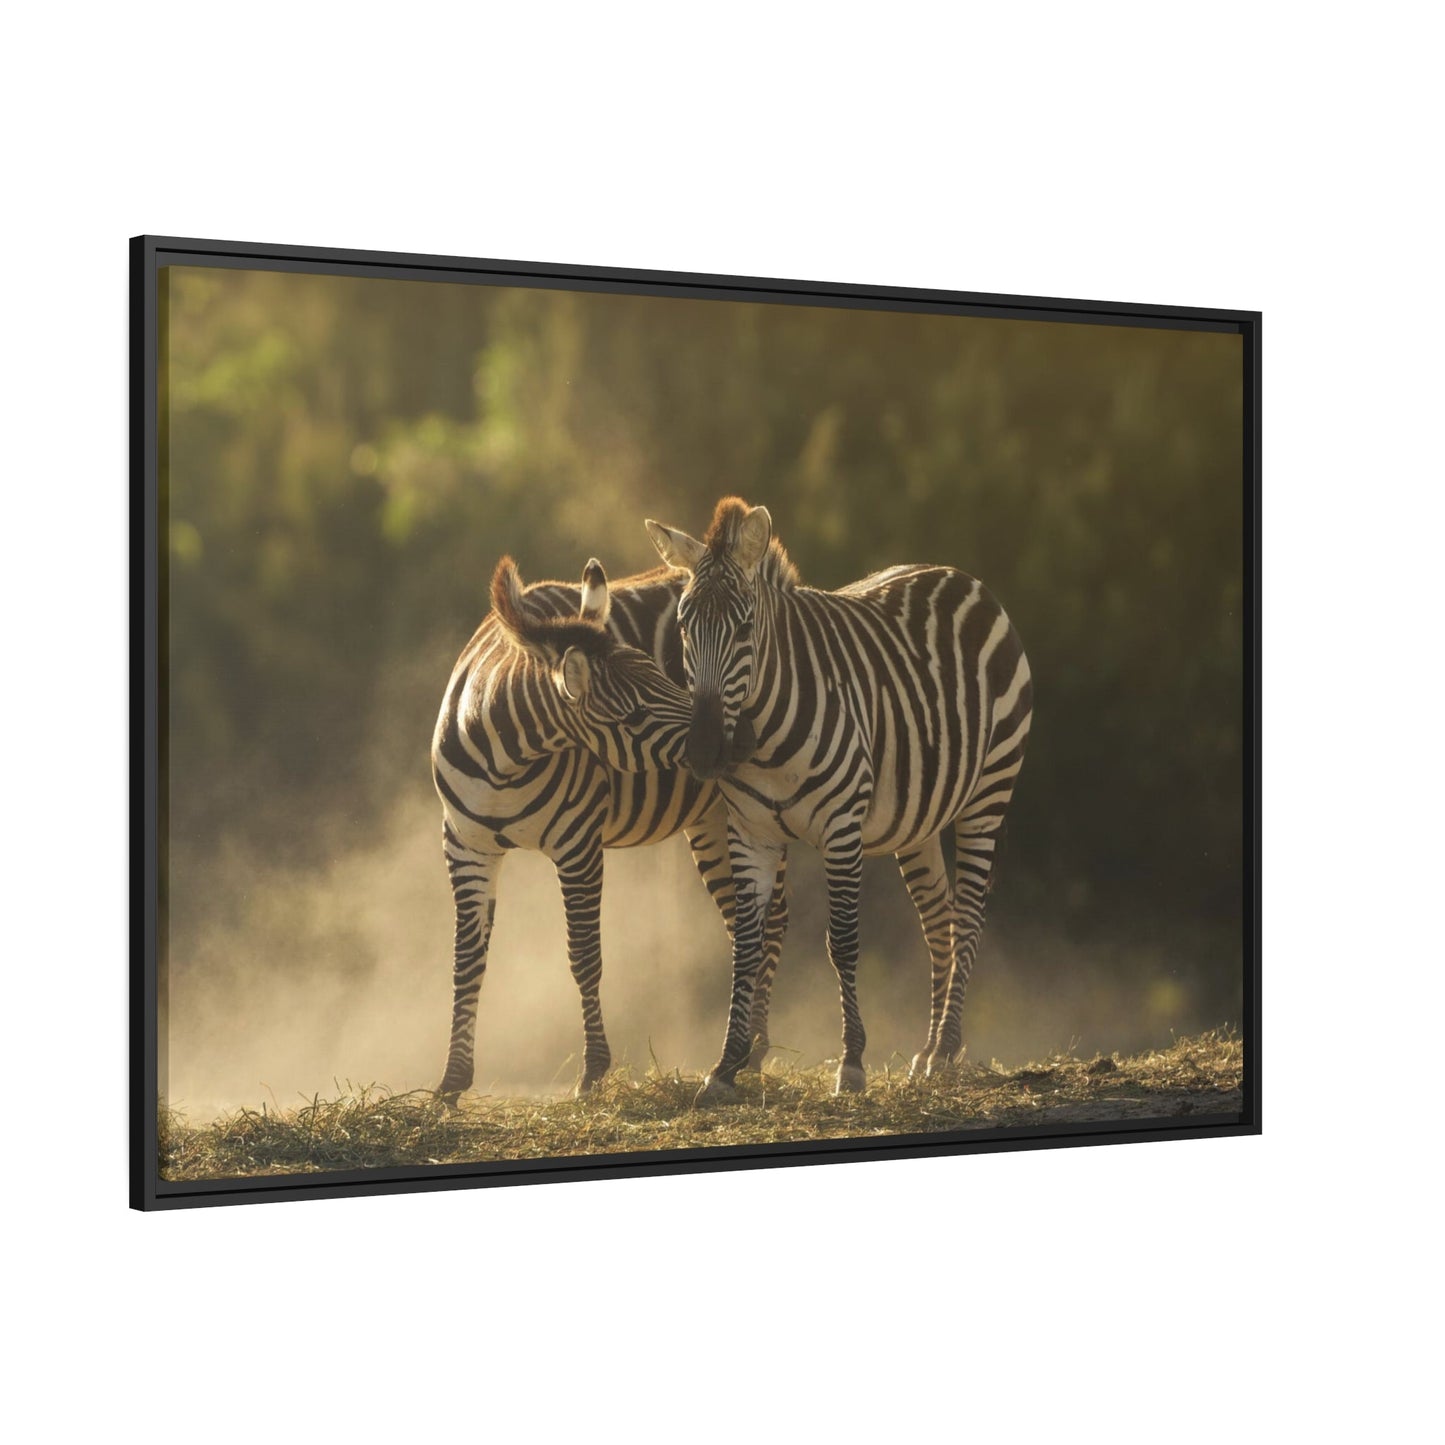 Wild Stripes: Stunning Zebras Canvas Print for Your Walls